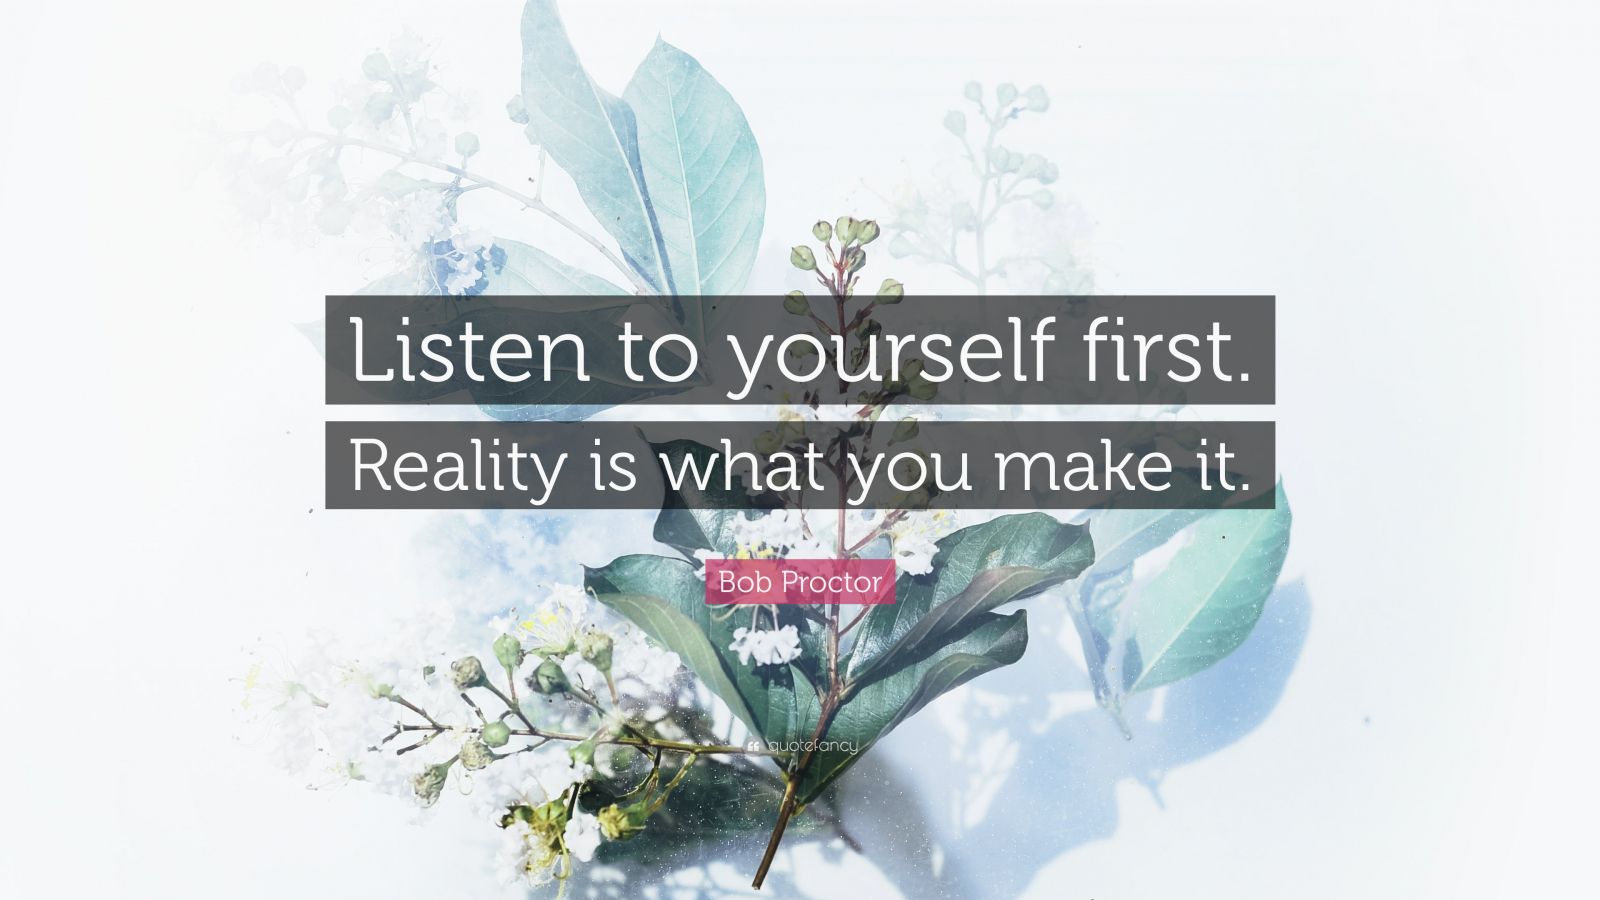 Bob Proctor Quote: “Listen to yourself first. Reality is what you make it.”